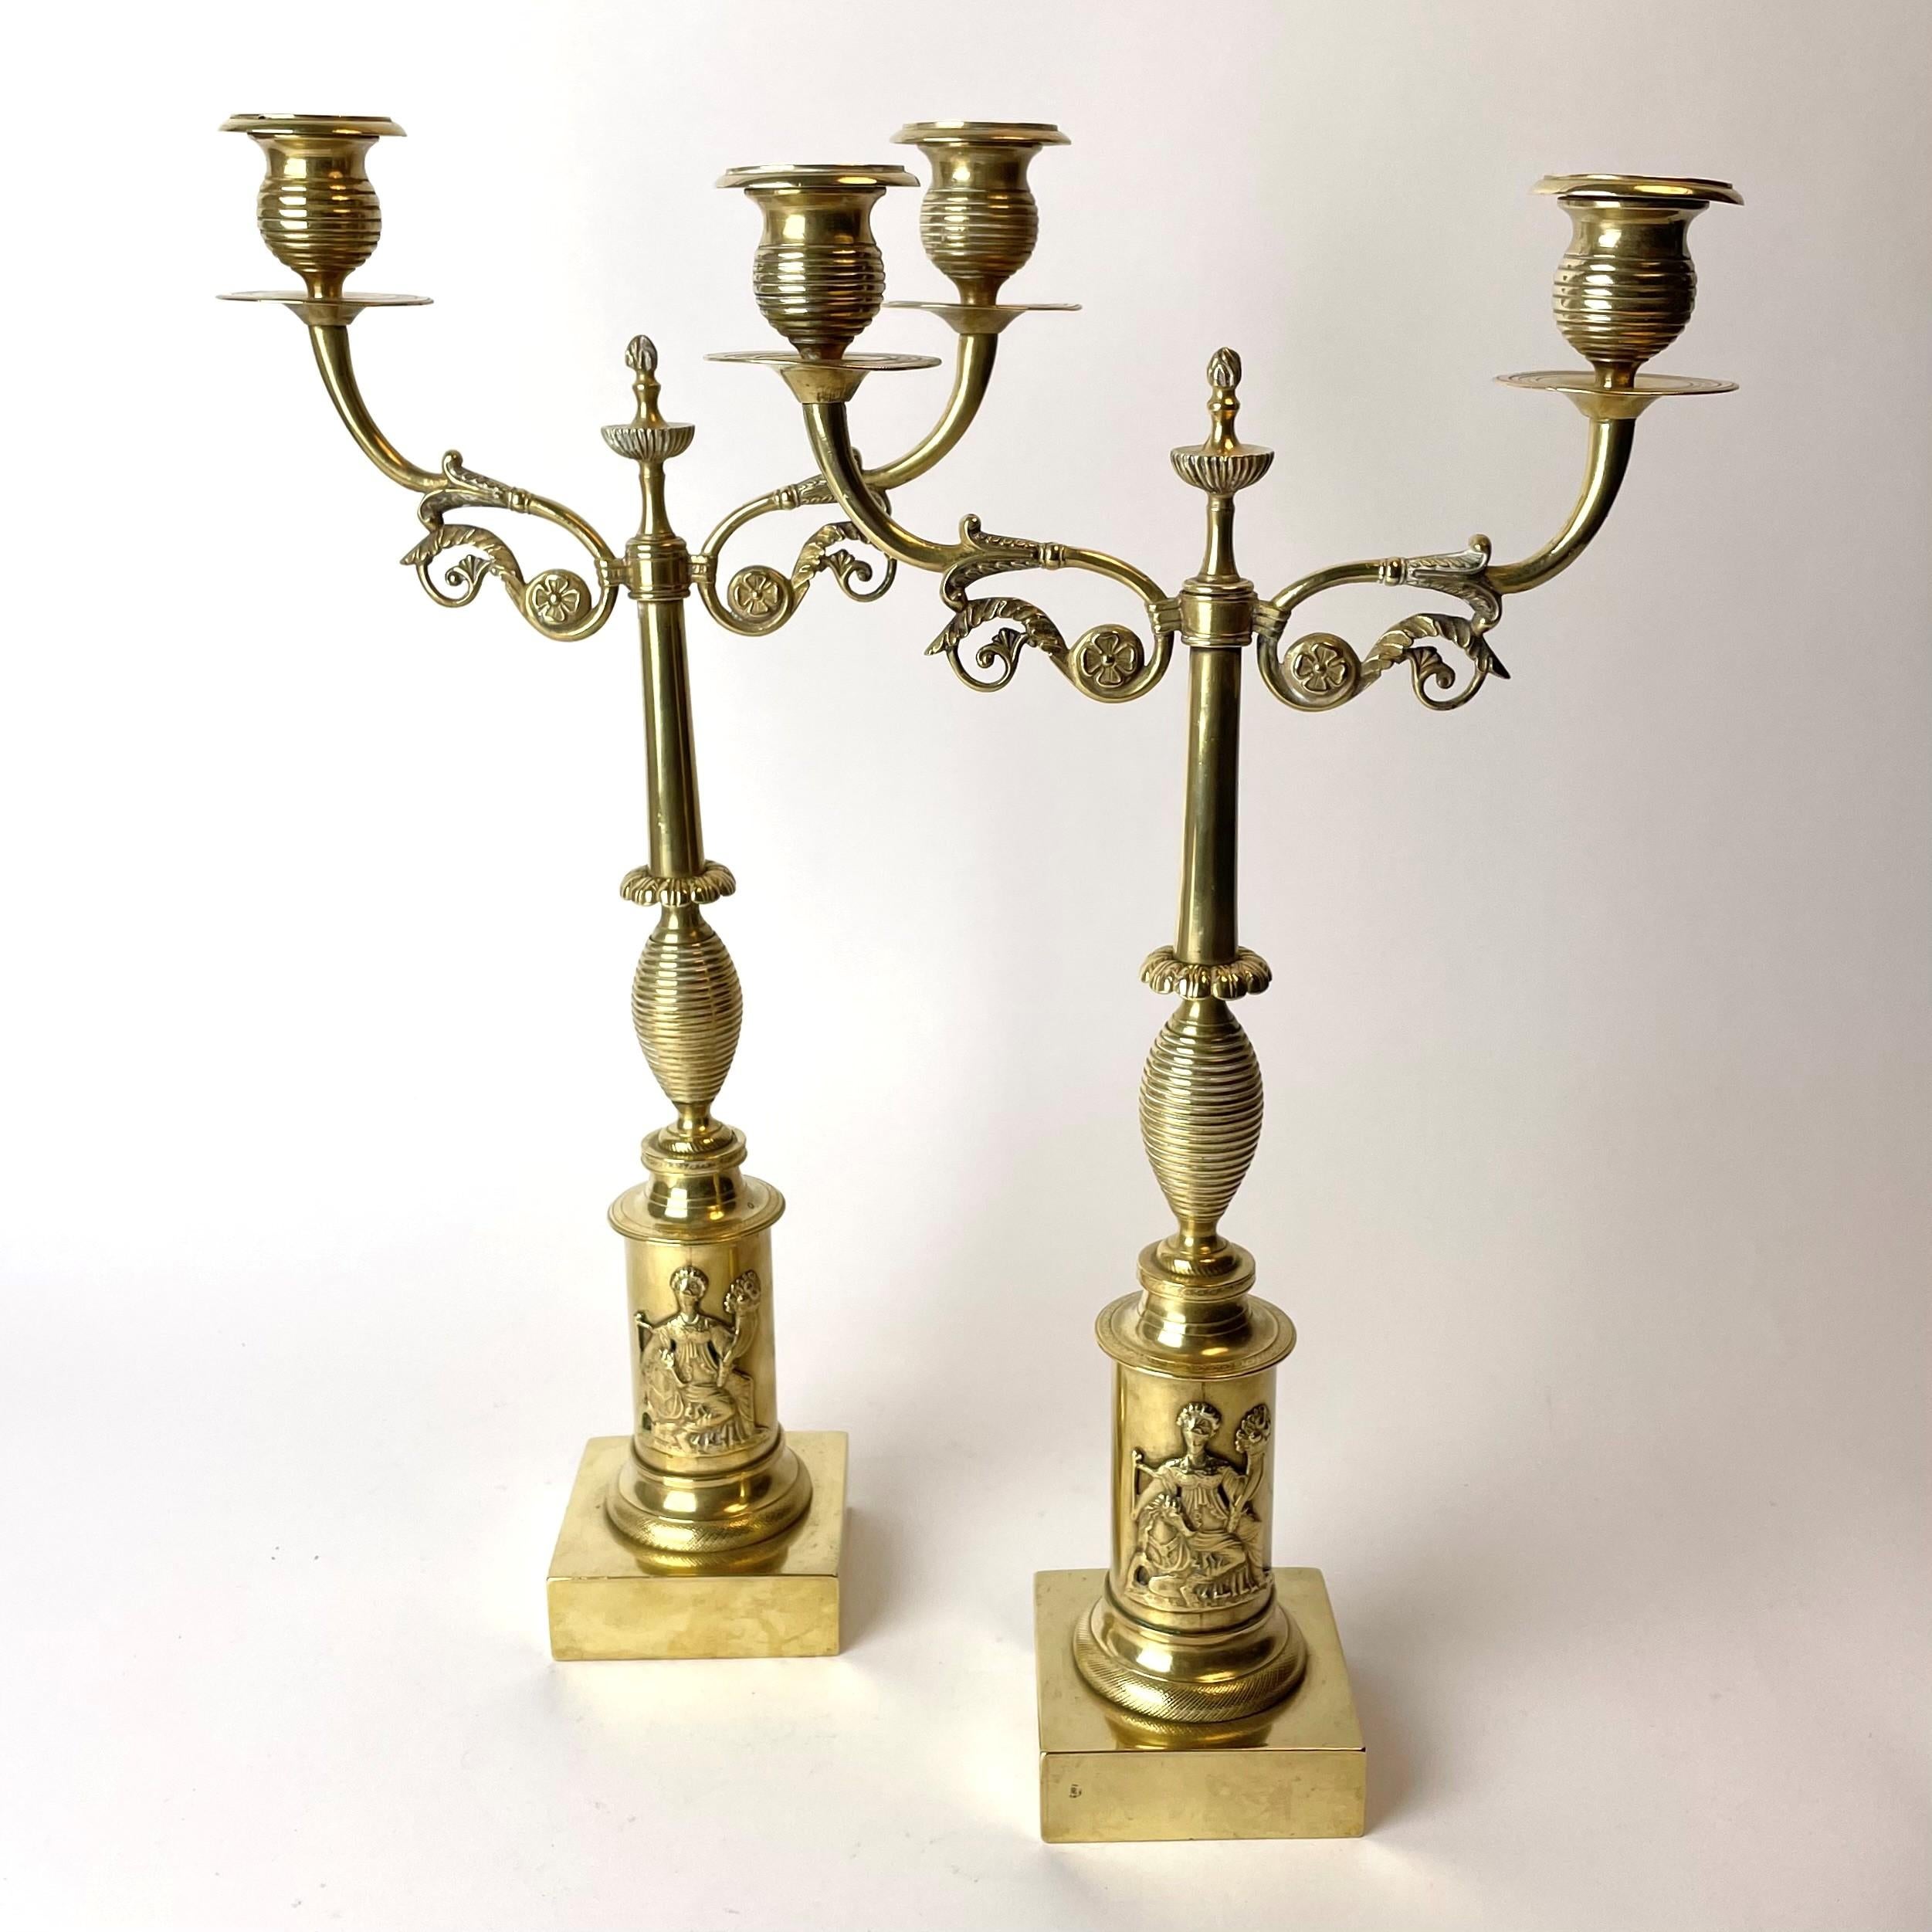 An elegant pair of Candelabras in brass from the 1820s. Swedish Empire (Karl Johan), with a simple and tasteful design.

Wear consistent with age and use.